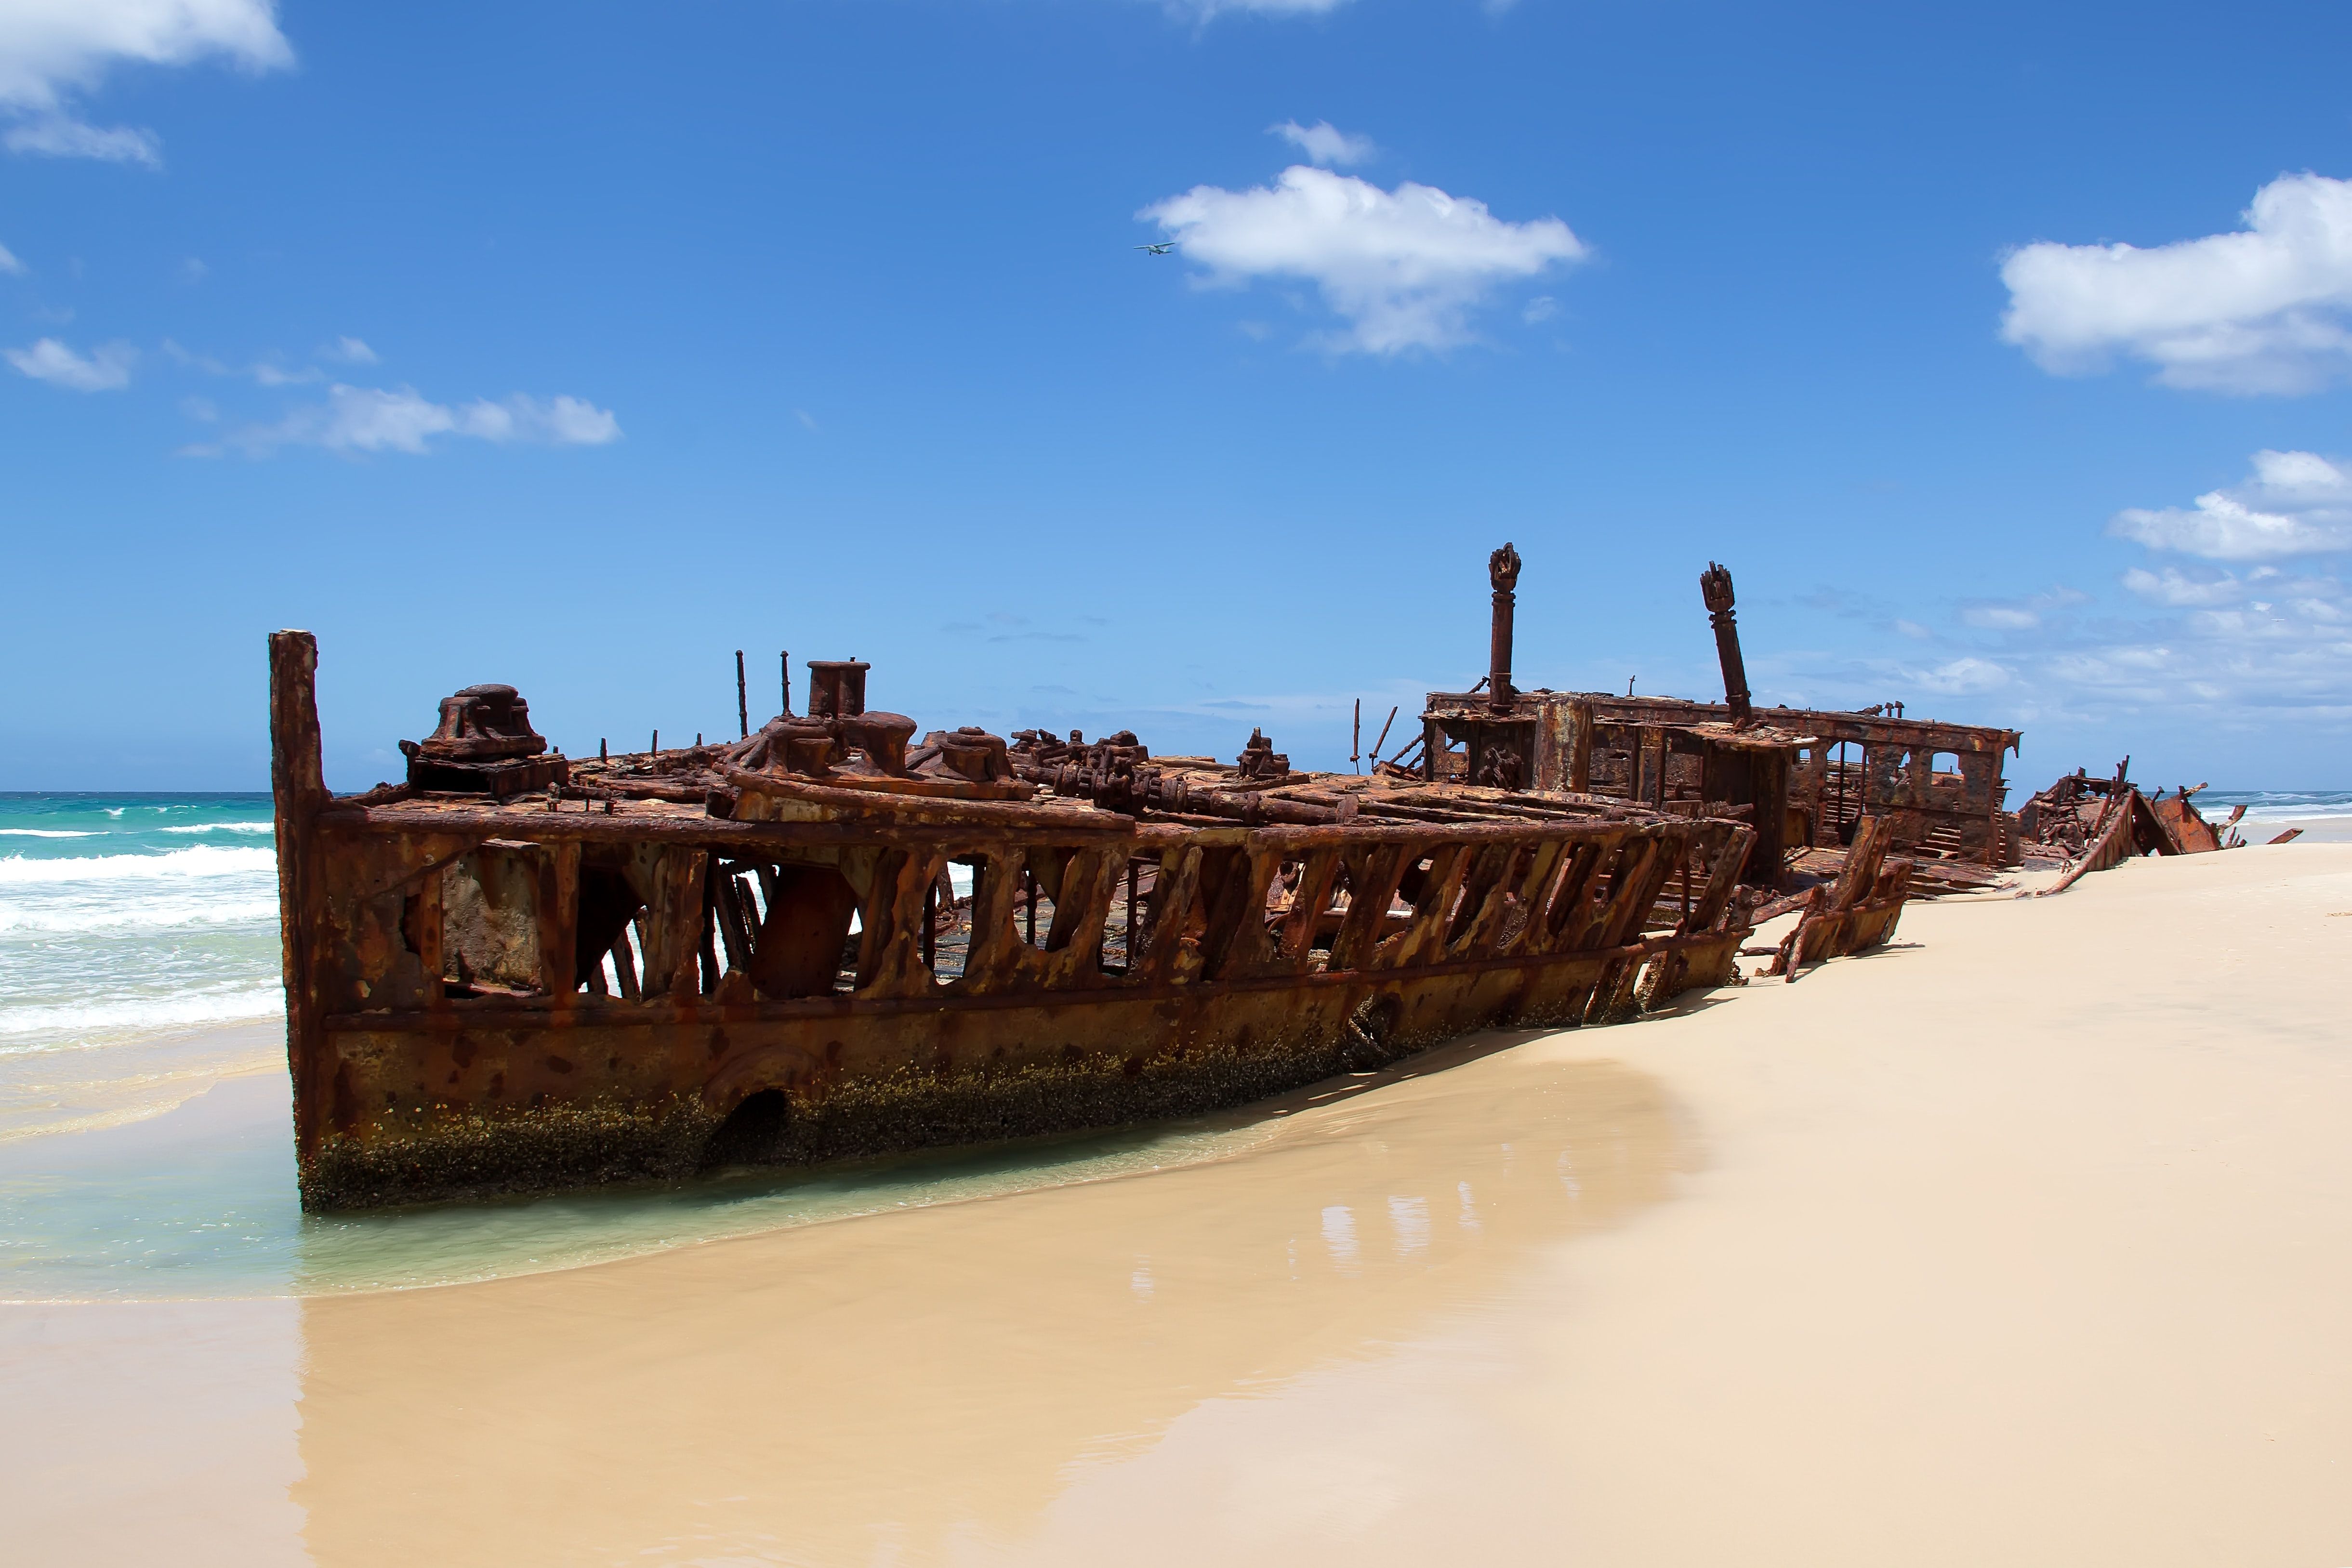 Old rusted ship at the beach